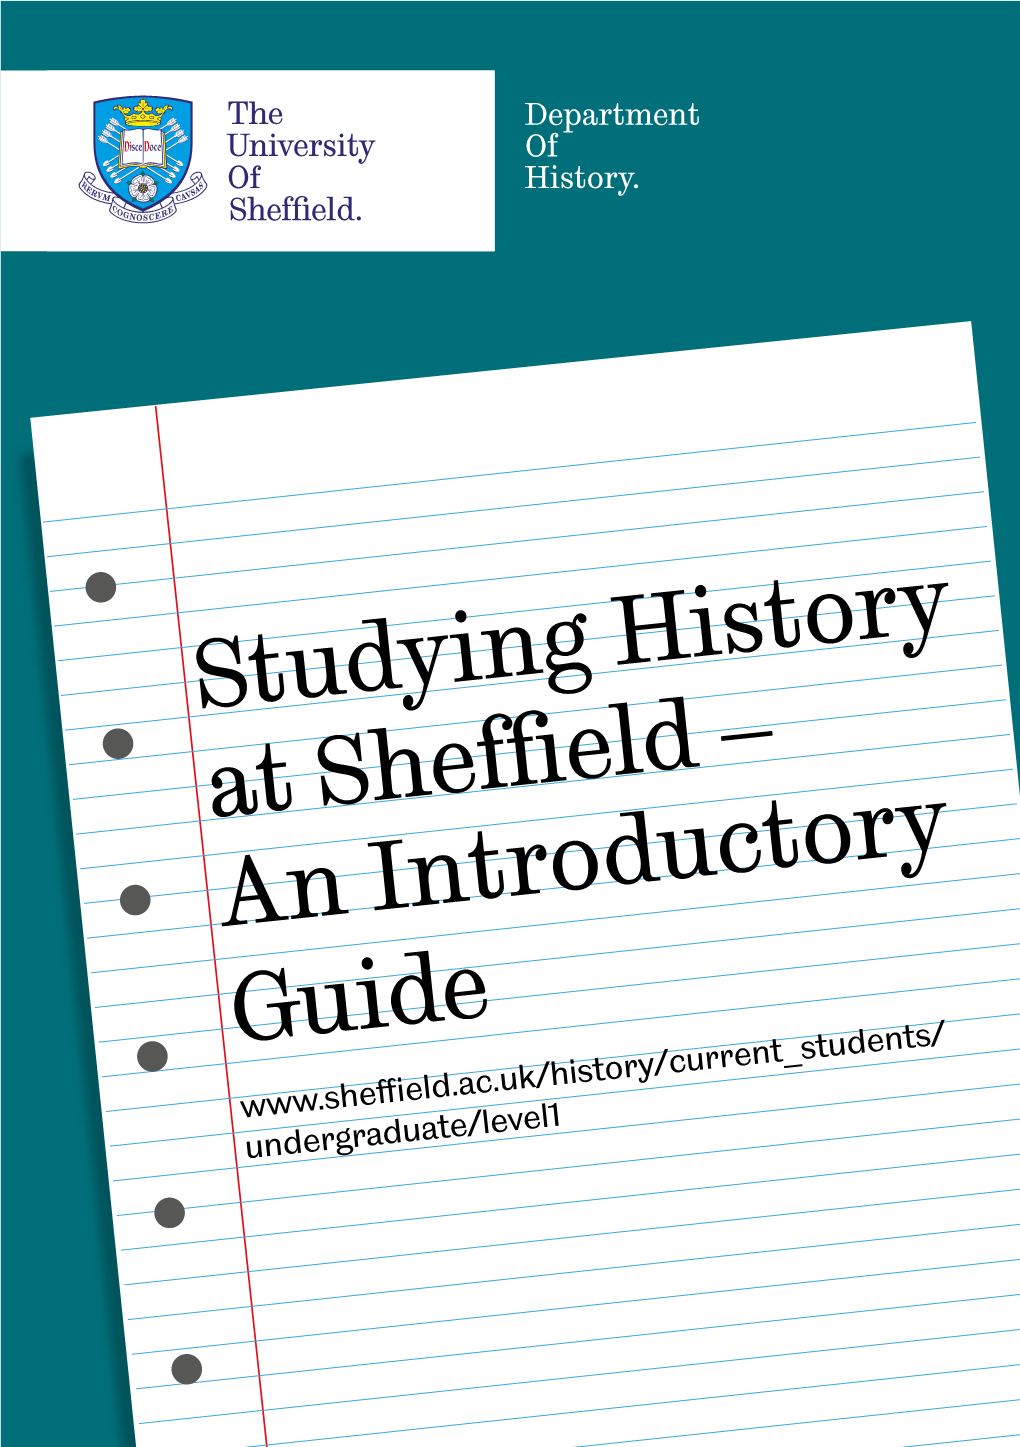 Studying History at Sheffield – an Introductory Guide Undergraduate/Level1 2